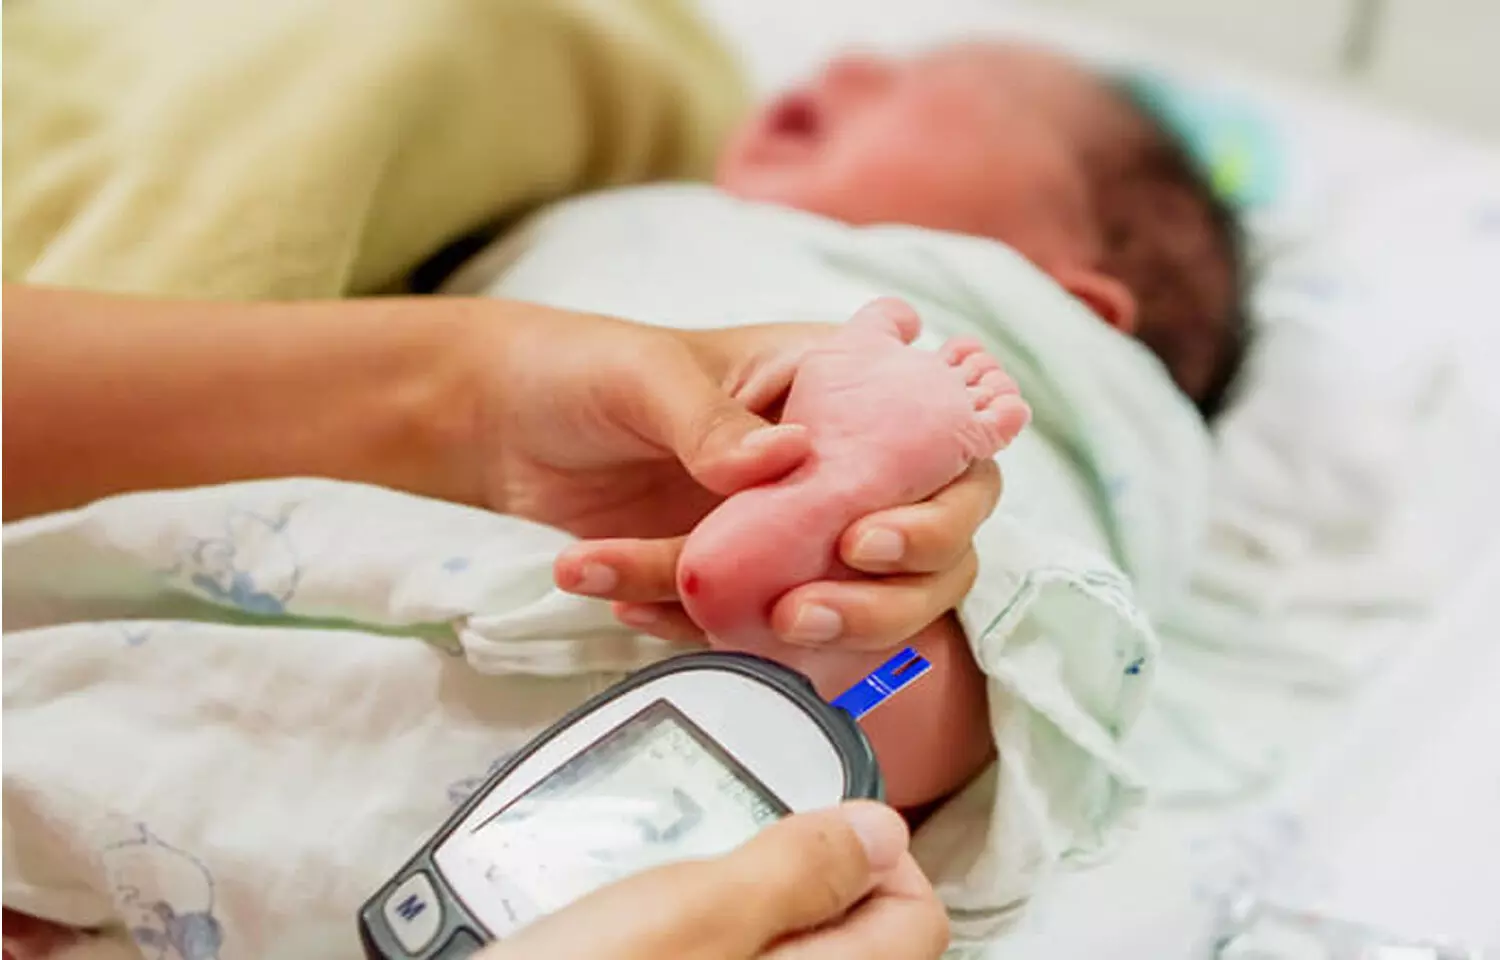 Oral dextrose gel may reduce risk of sudden fall of blood sugar in neonates: Study